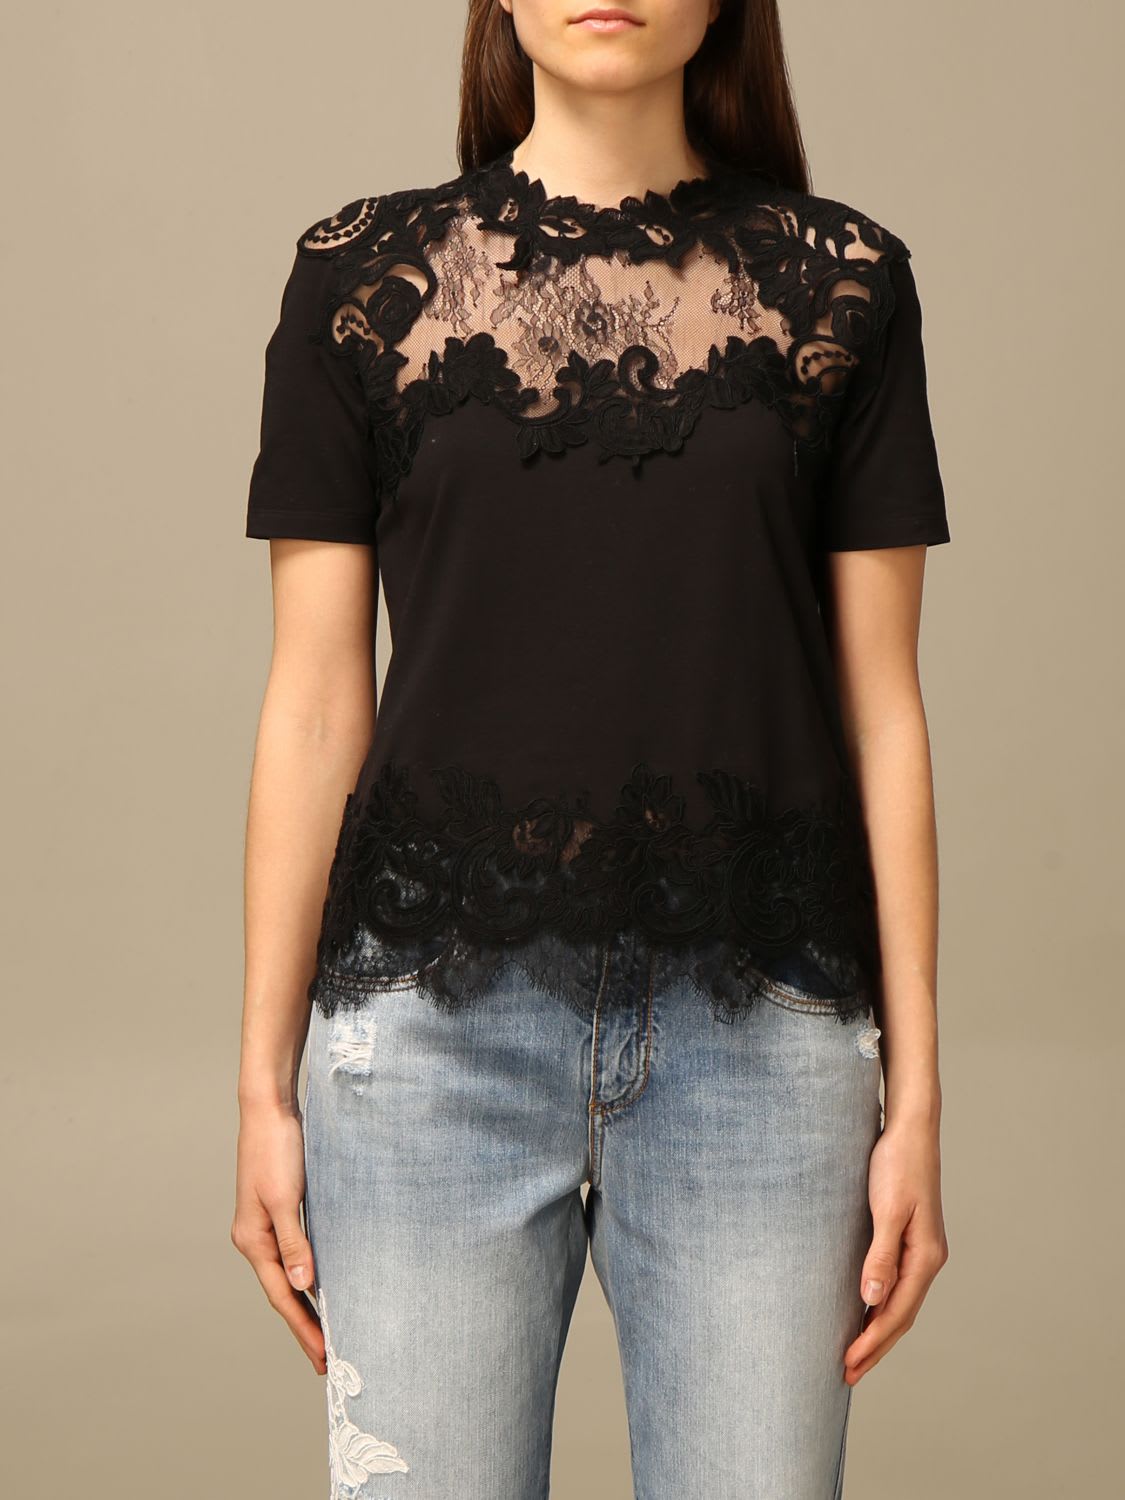 Ermanno Scervino Cotton Sweater With Floral Embroidery In Black